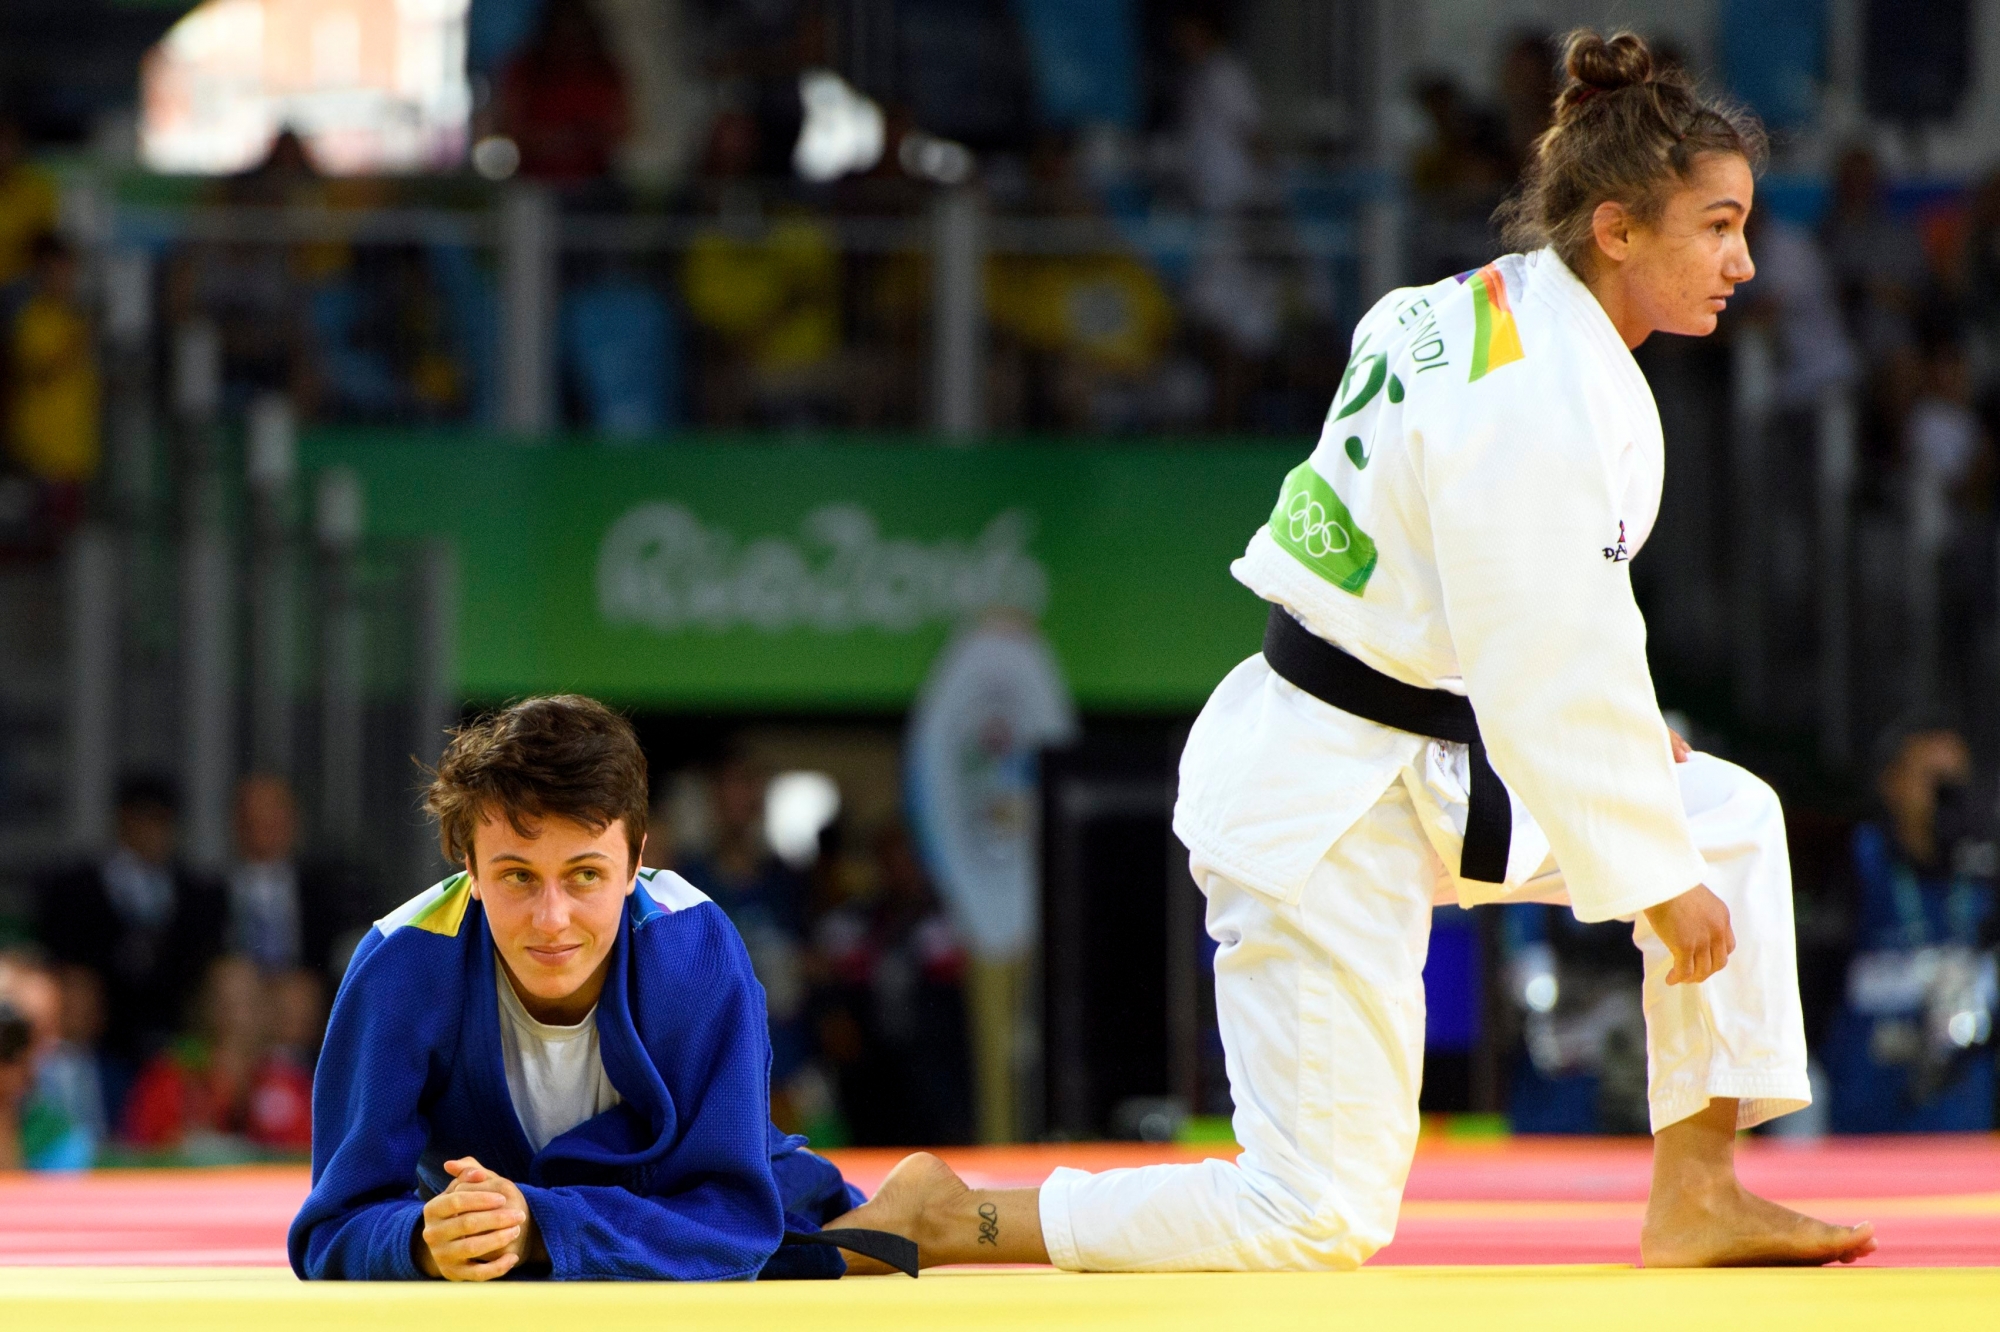 Evelyne Tschopp, left, of Switzerland reacts after loosing against Majlinda Kelmendi, right, of Kosovo during the round of 16 women's 52-kg judo competition at the Carioca Arena 2 in Rio de Janeiro, Brazil, at the Rio 2016 Olympic Summer Games, on Sunday, August 07, 2016. (KEYSTONE/Laurent Gillieron) BRAZIL RIO OLYMPICS 2016 JUDO